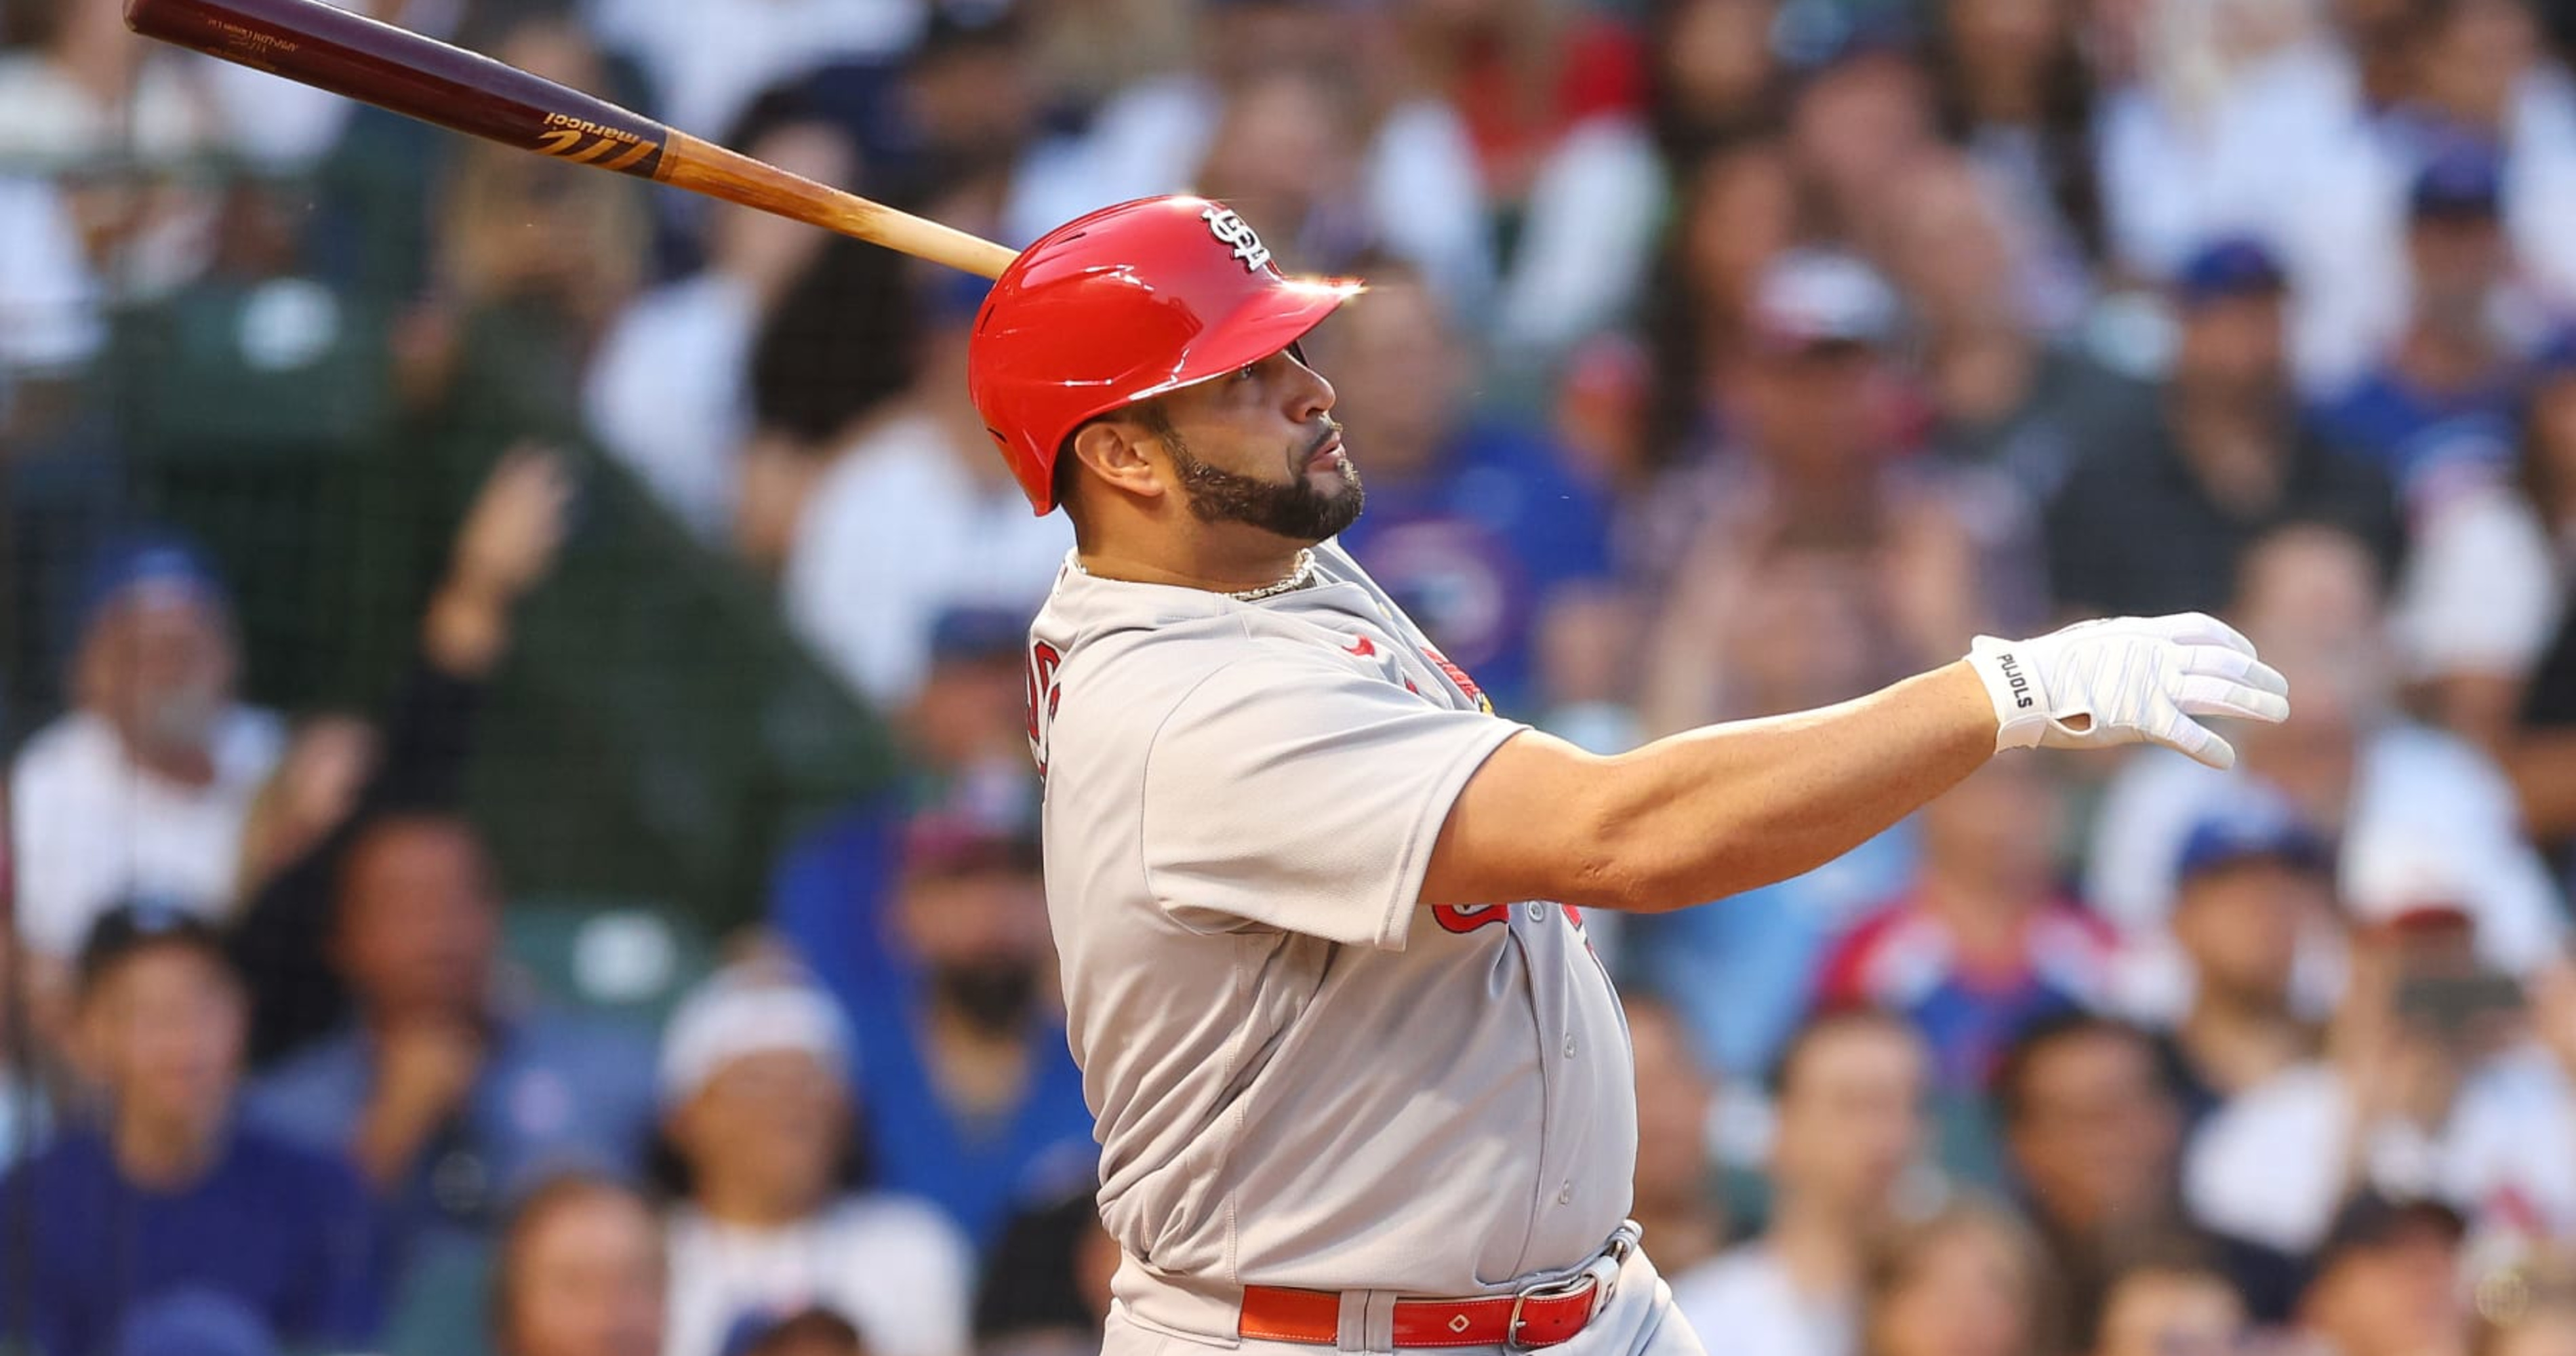 Pujols admits he hasn't watched much baseball since retirement